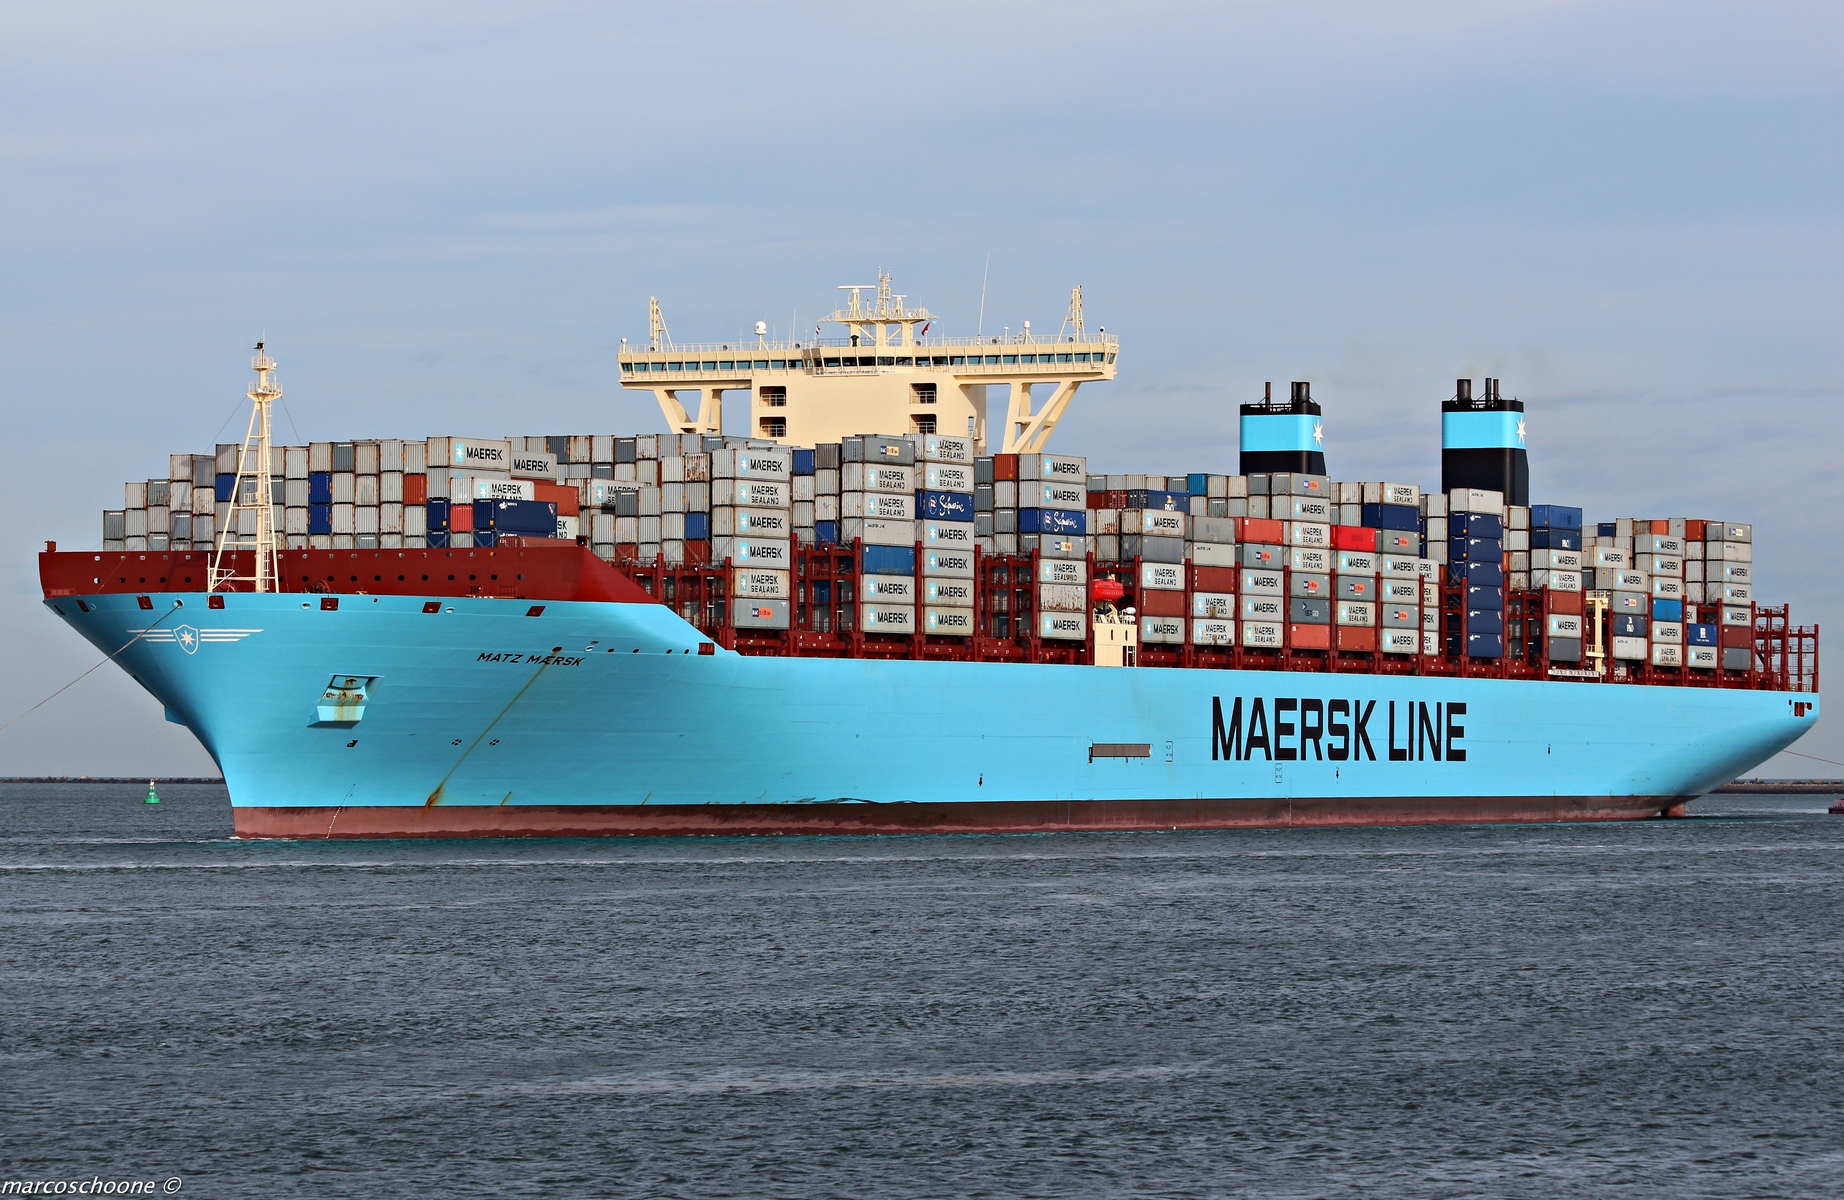 A P Moller Maersk reports strong performance in Q1 2021 with record profit India Shipping News